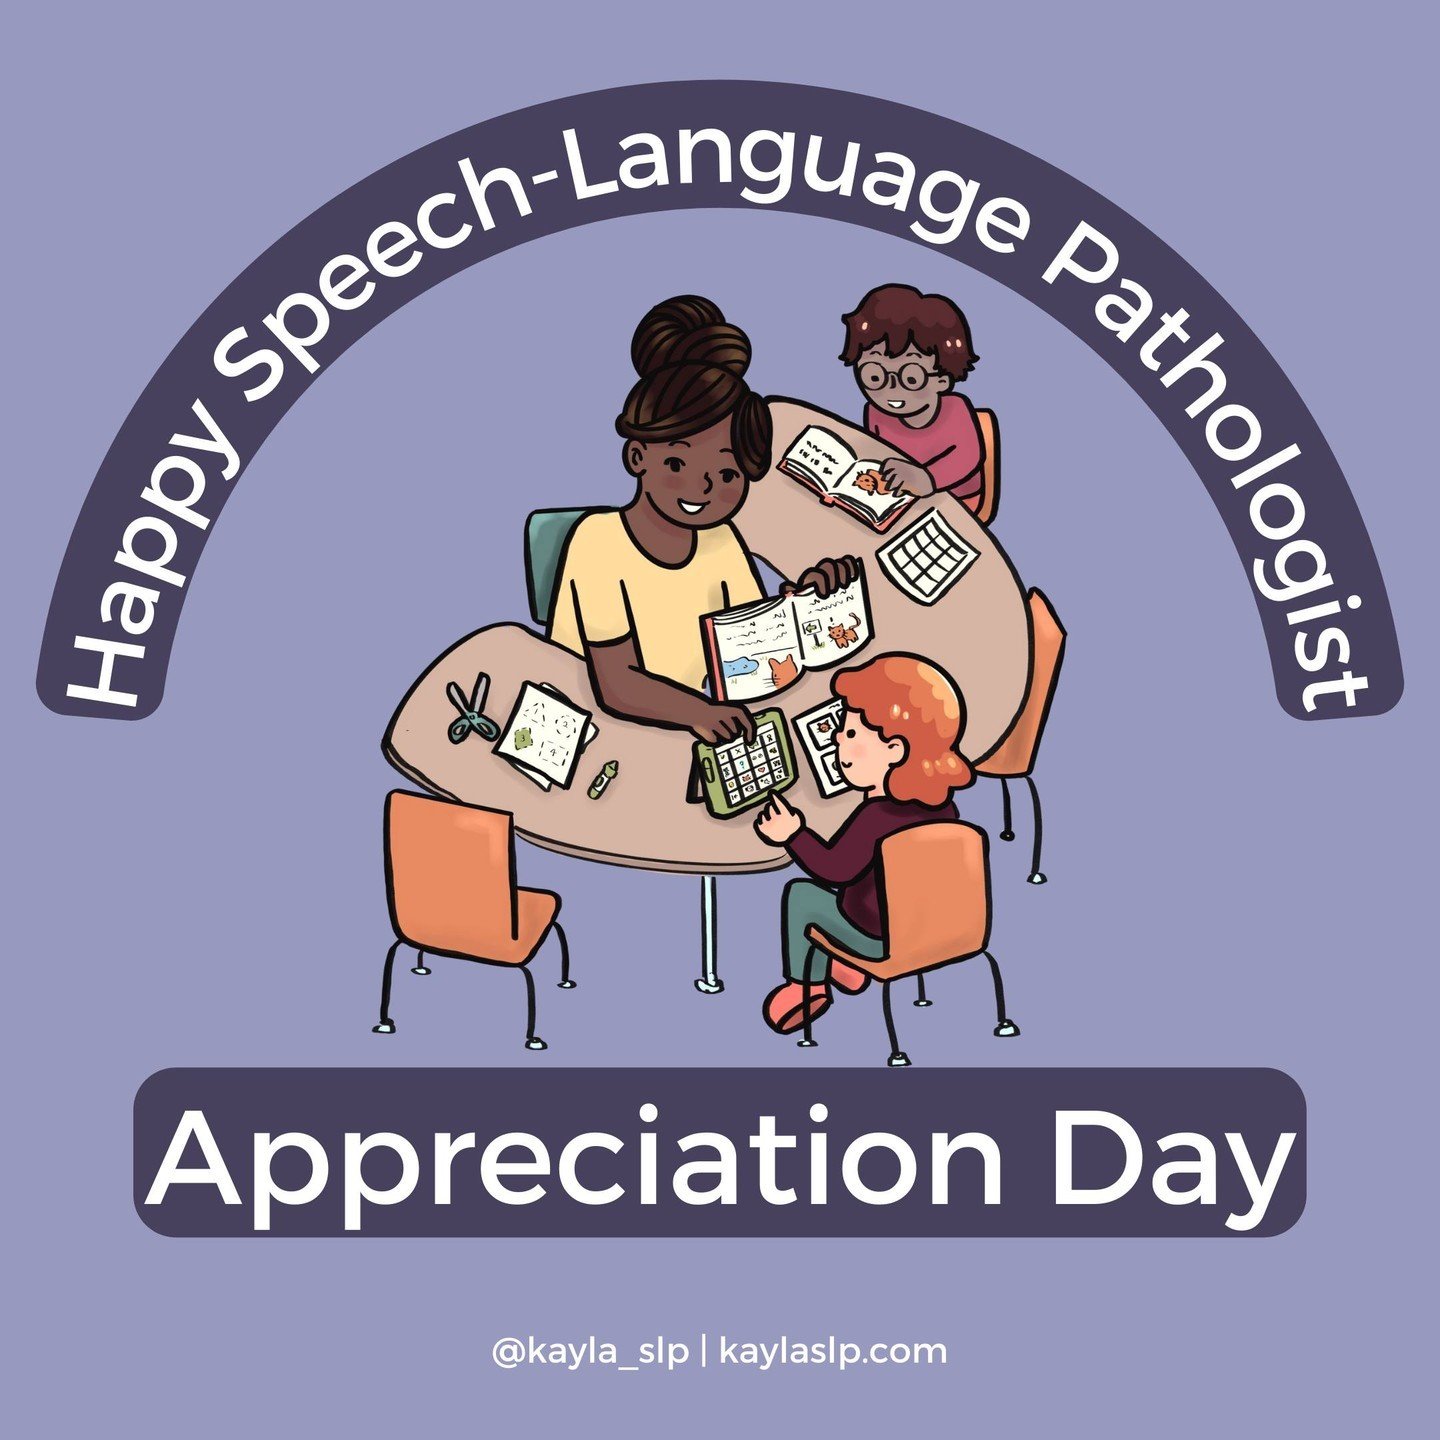 🎉✨ Happy SLP Appreciation Day! ✨🎉 ⁠
⁠
Today, I'm feeling proud to be part of a profession that helps so many across the lifespan! Let&rsquo;s celebrate all the amazing SLPs who make a difference every day. ⁠
⁠
Spread the love and tag your favorite 